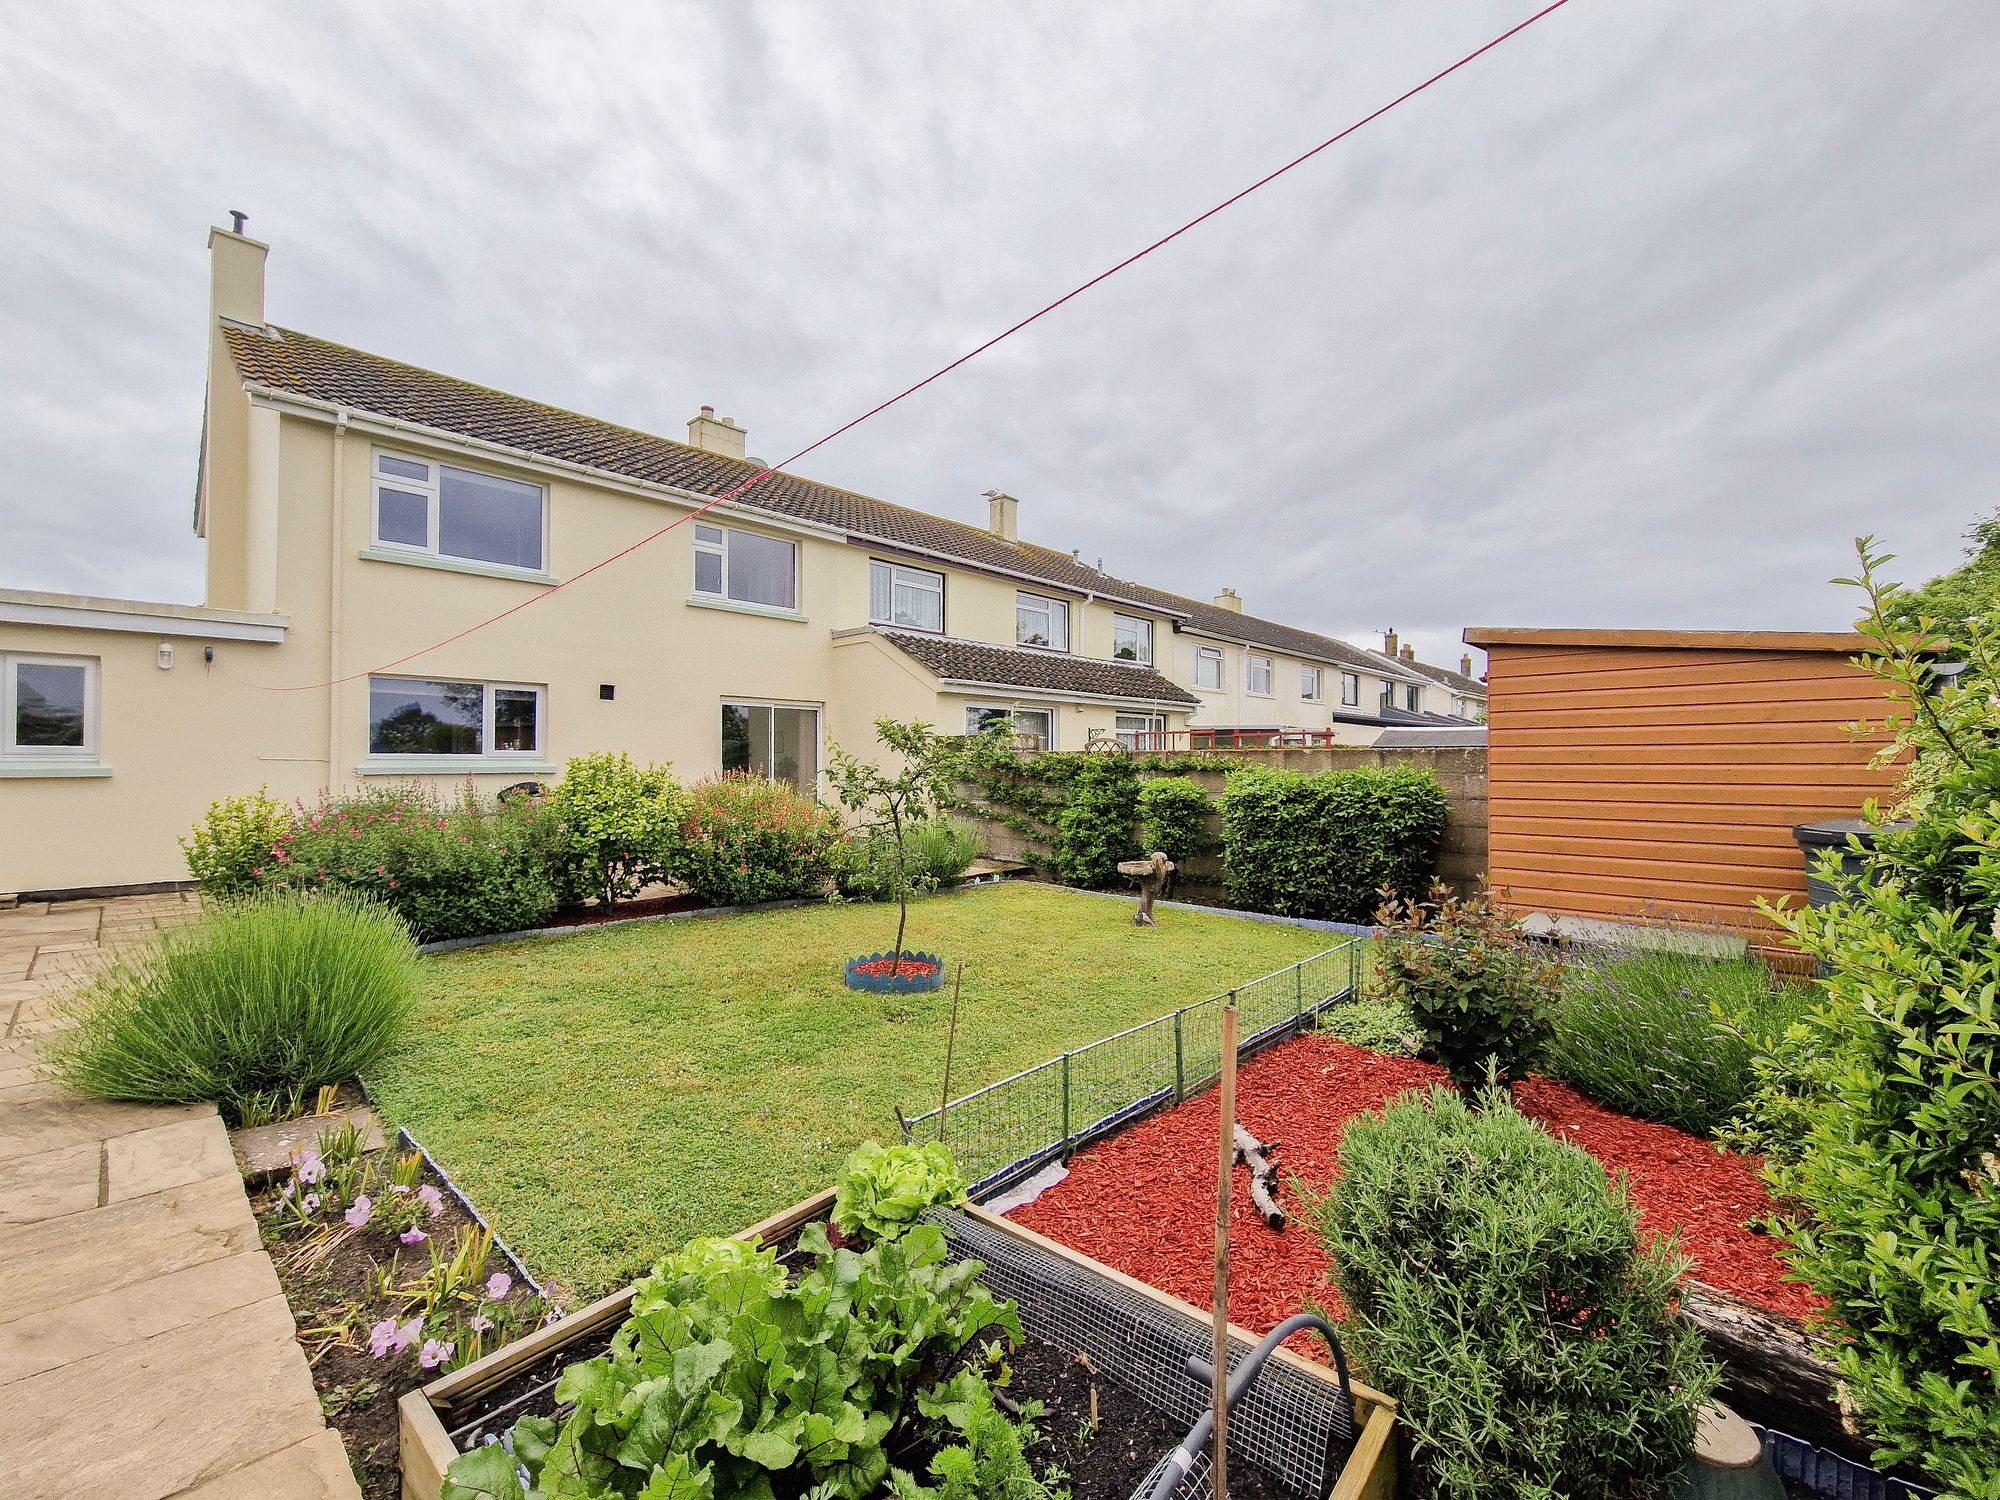 3 bed Property For Sale in St. Peter, Jersey